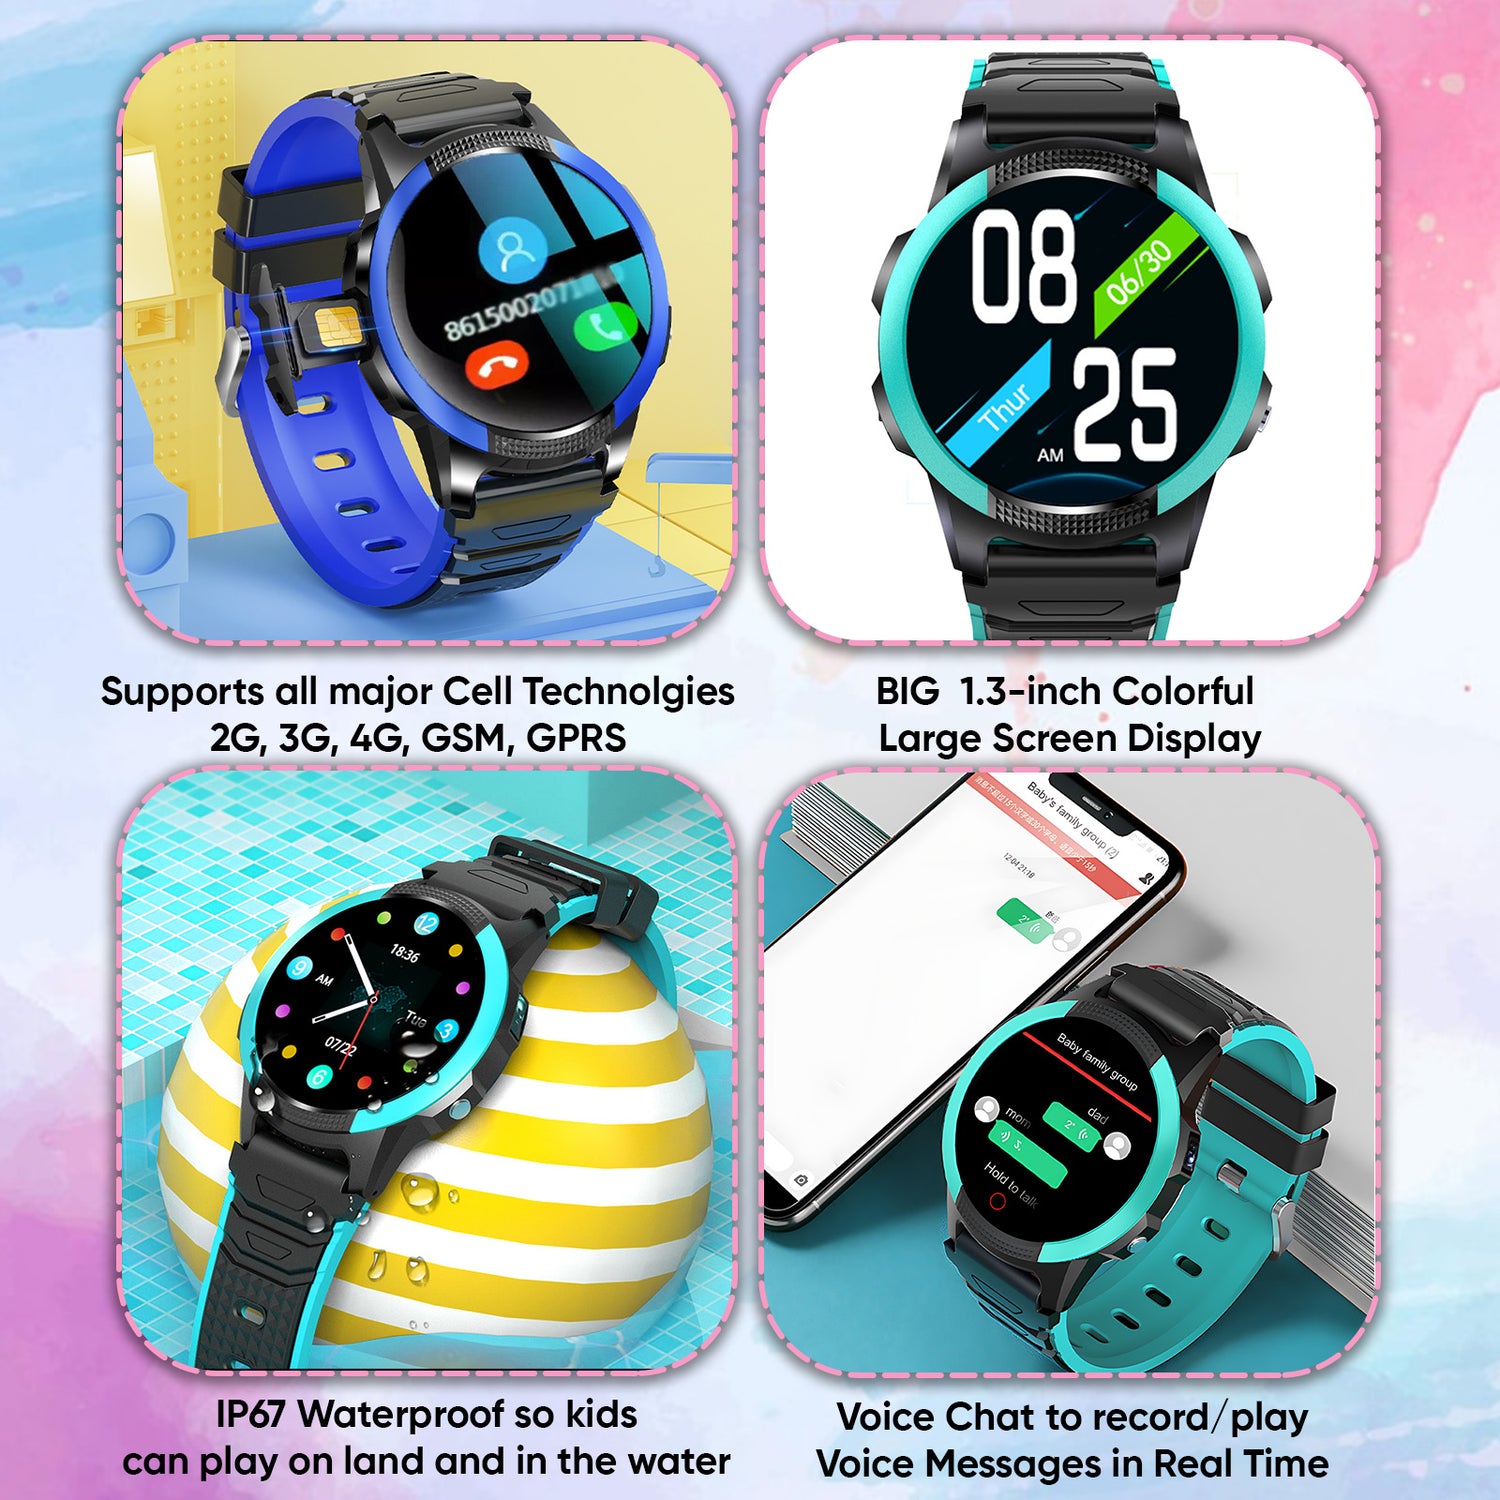 Four different colored smart watches for kids up to 12 years old, equipped with GPS tracker and SOS button